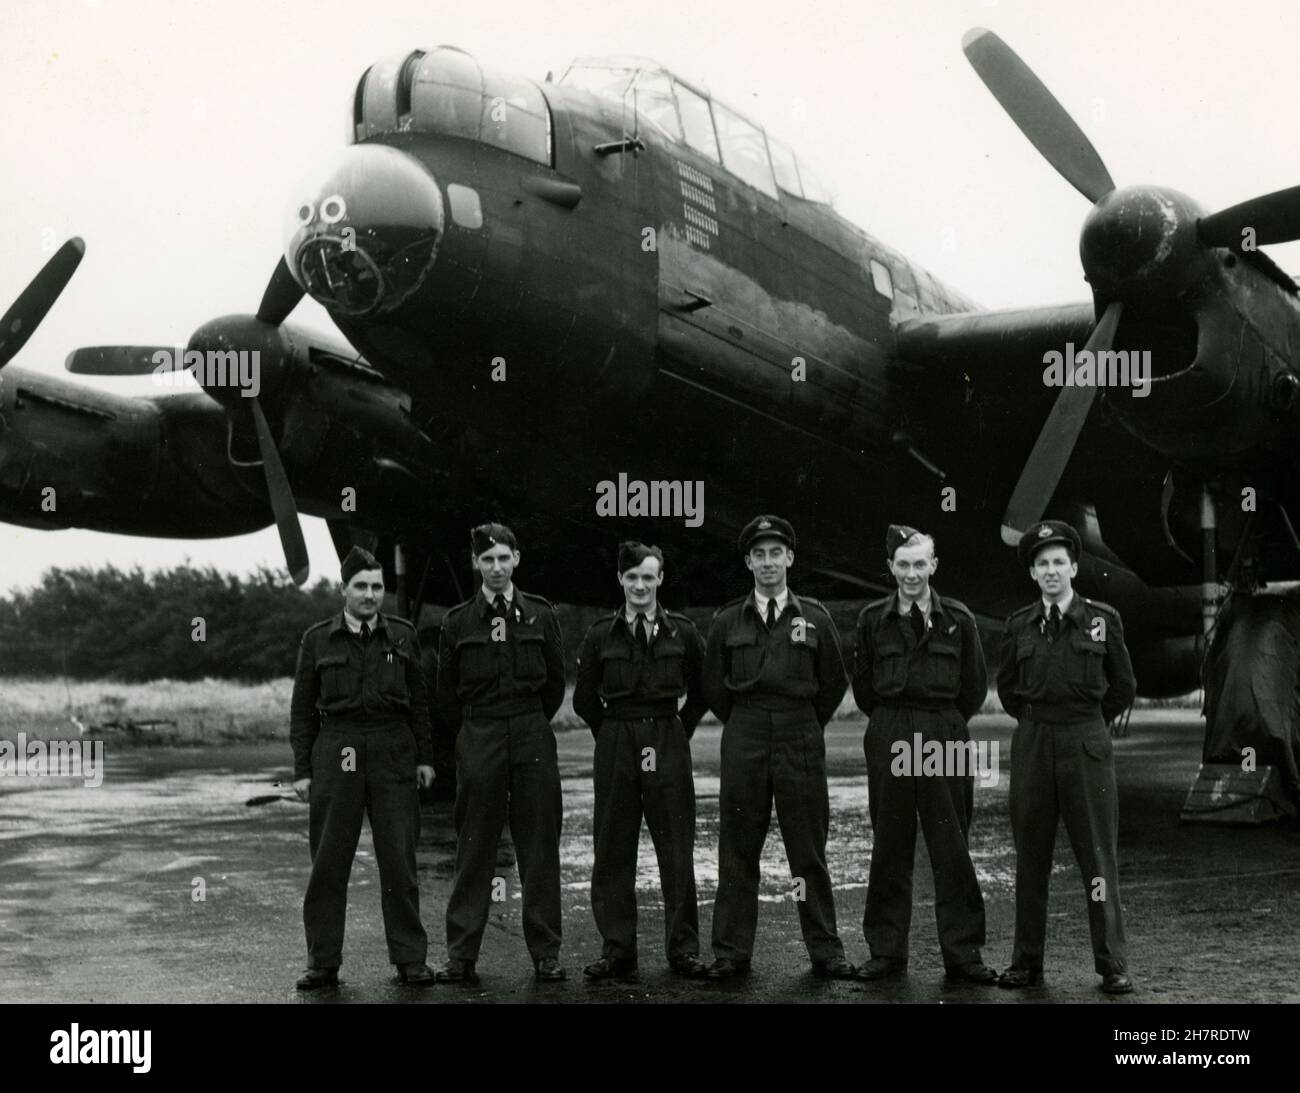 514 Squadron RAF aircrew with their Avro Lancaster bomber. Waterbeach, Cambridgeshire. March - July 1945. The crew raided Germany in March - April 1945. In May 1945 they repatriated Allied POWs, and also took part in Operation Manna food drops to The Hague, Holland. Stock Photo